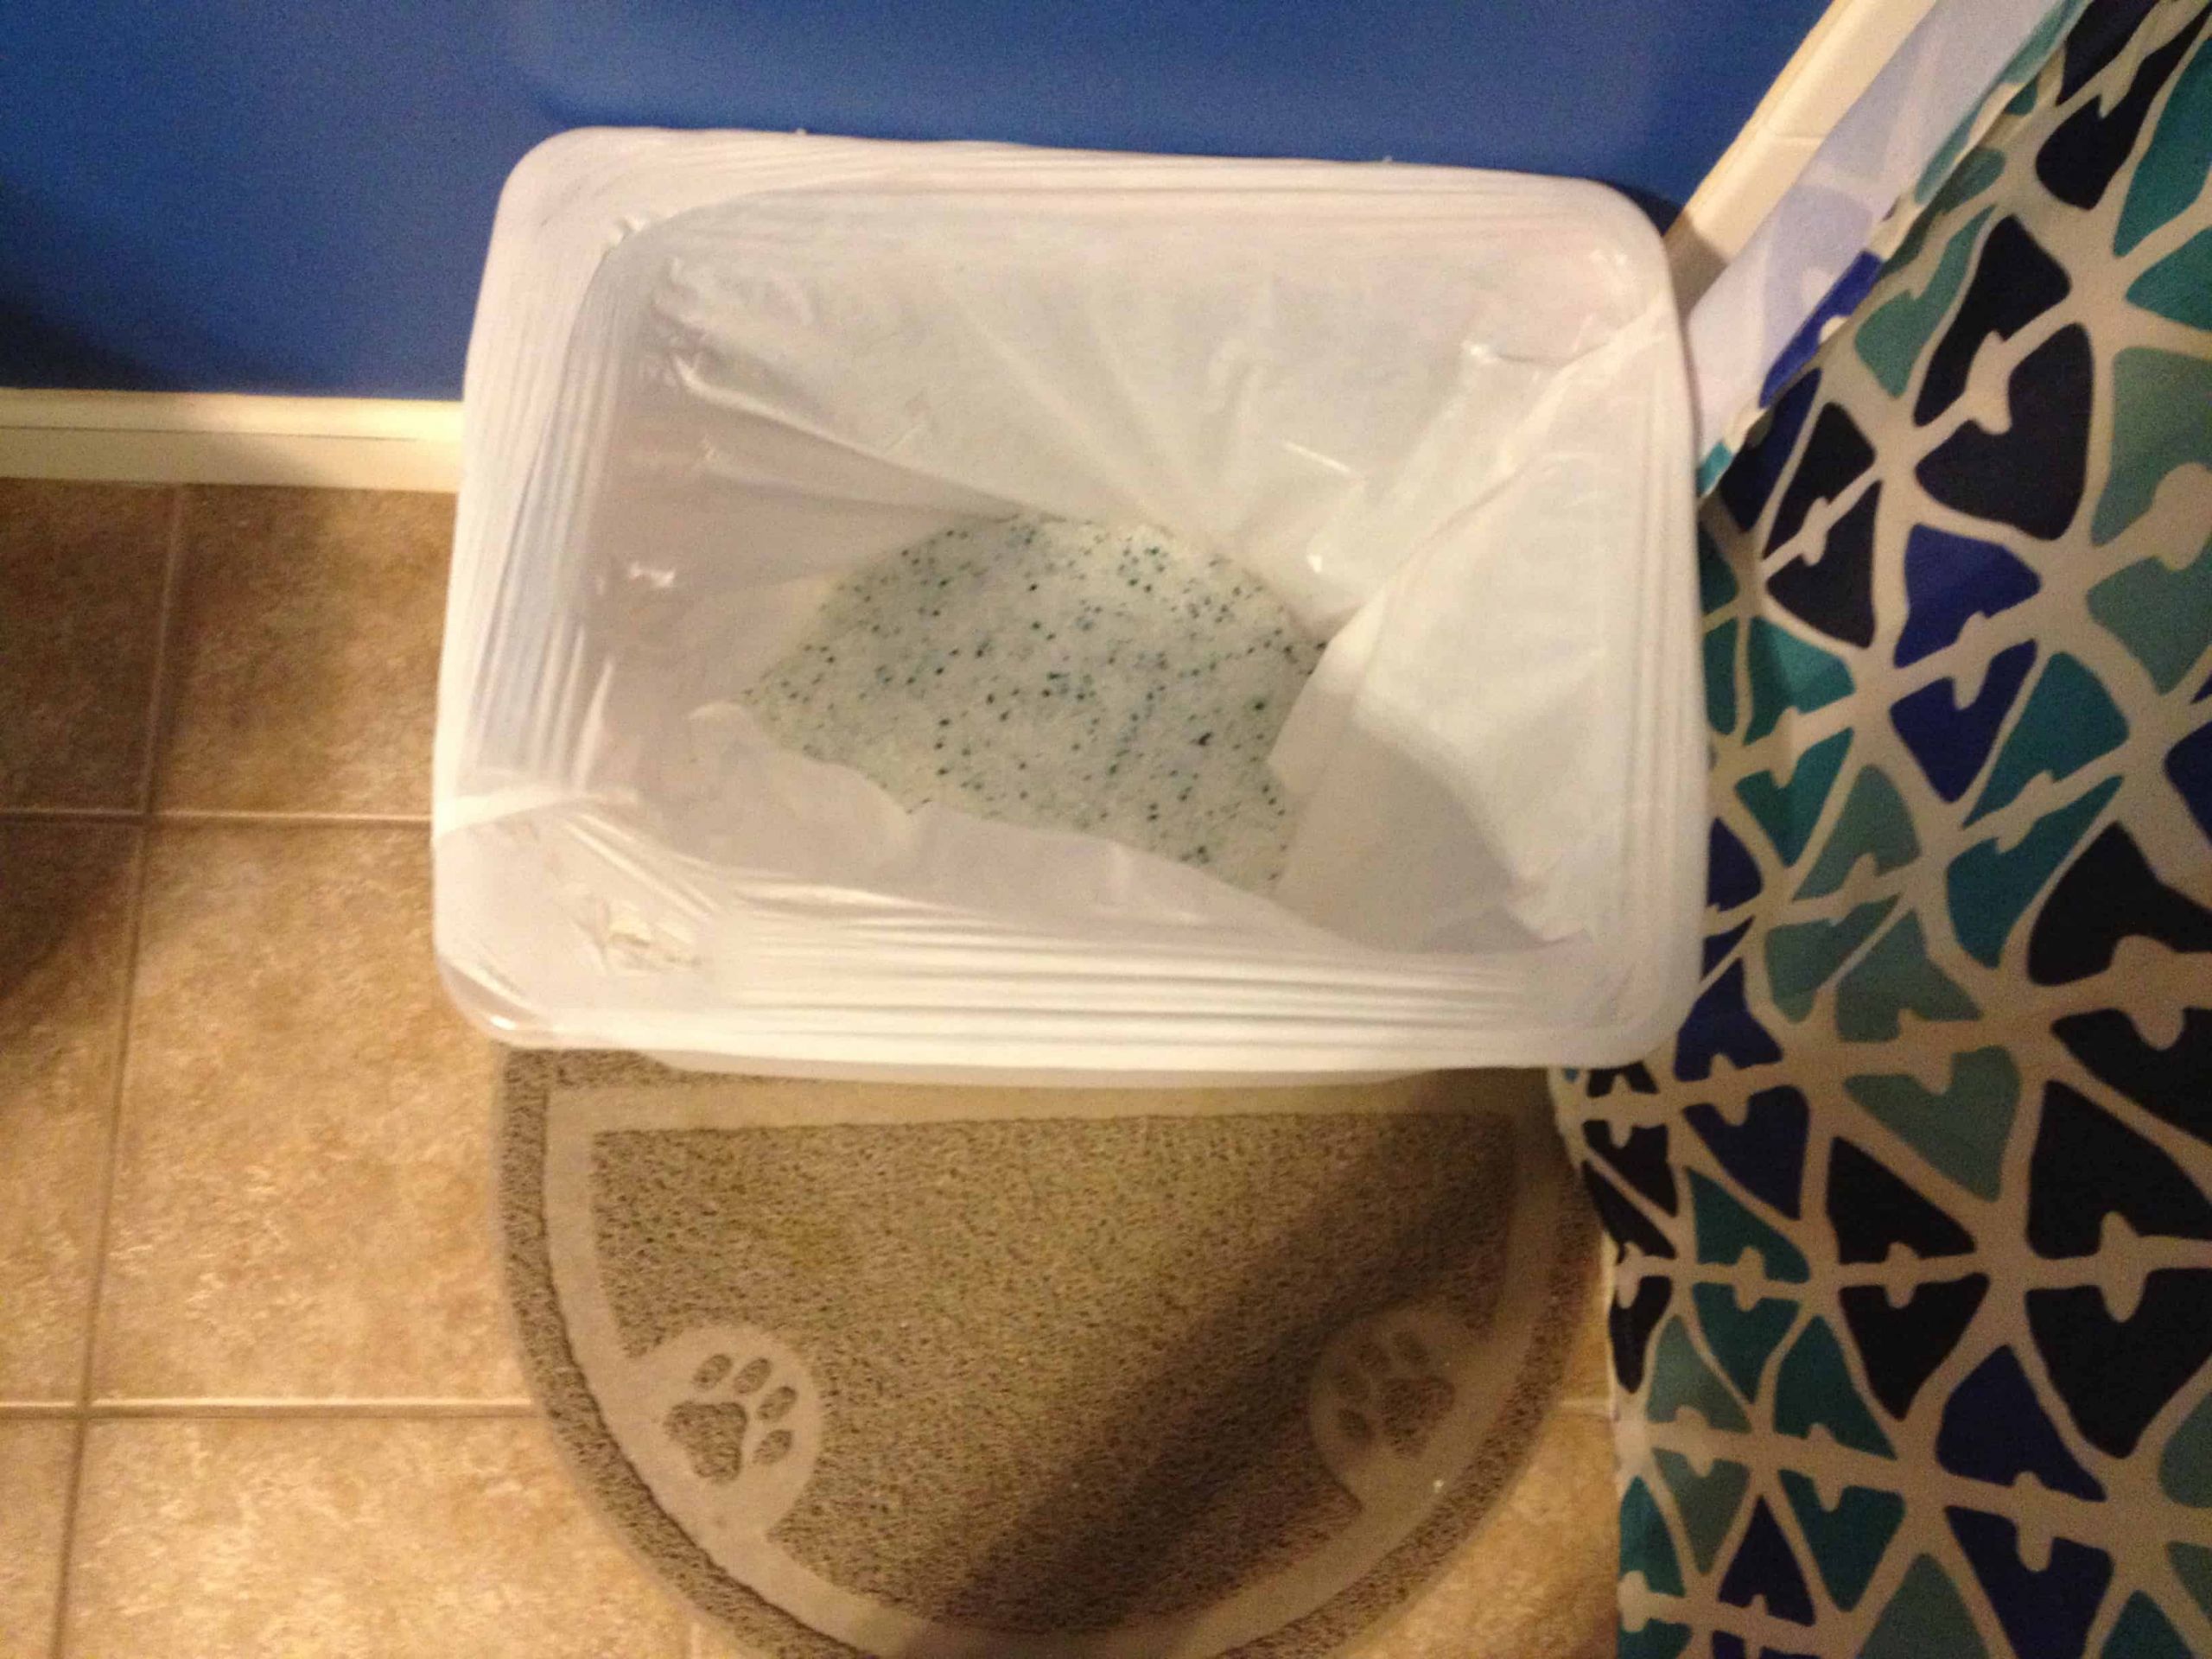 DIY Top Entry Litter Box
 diy top entry litter box Archives Charleston Crafted